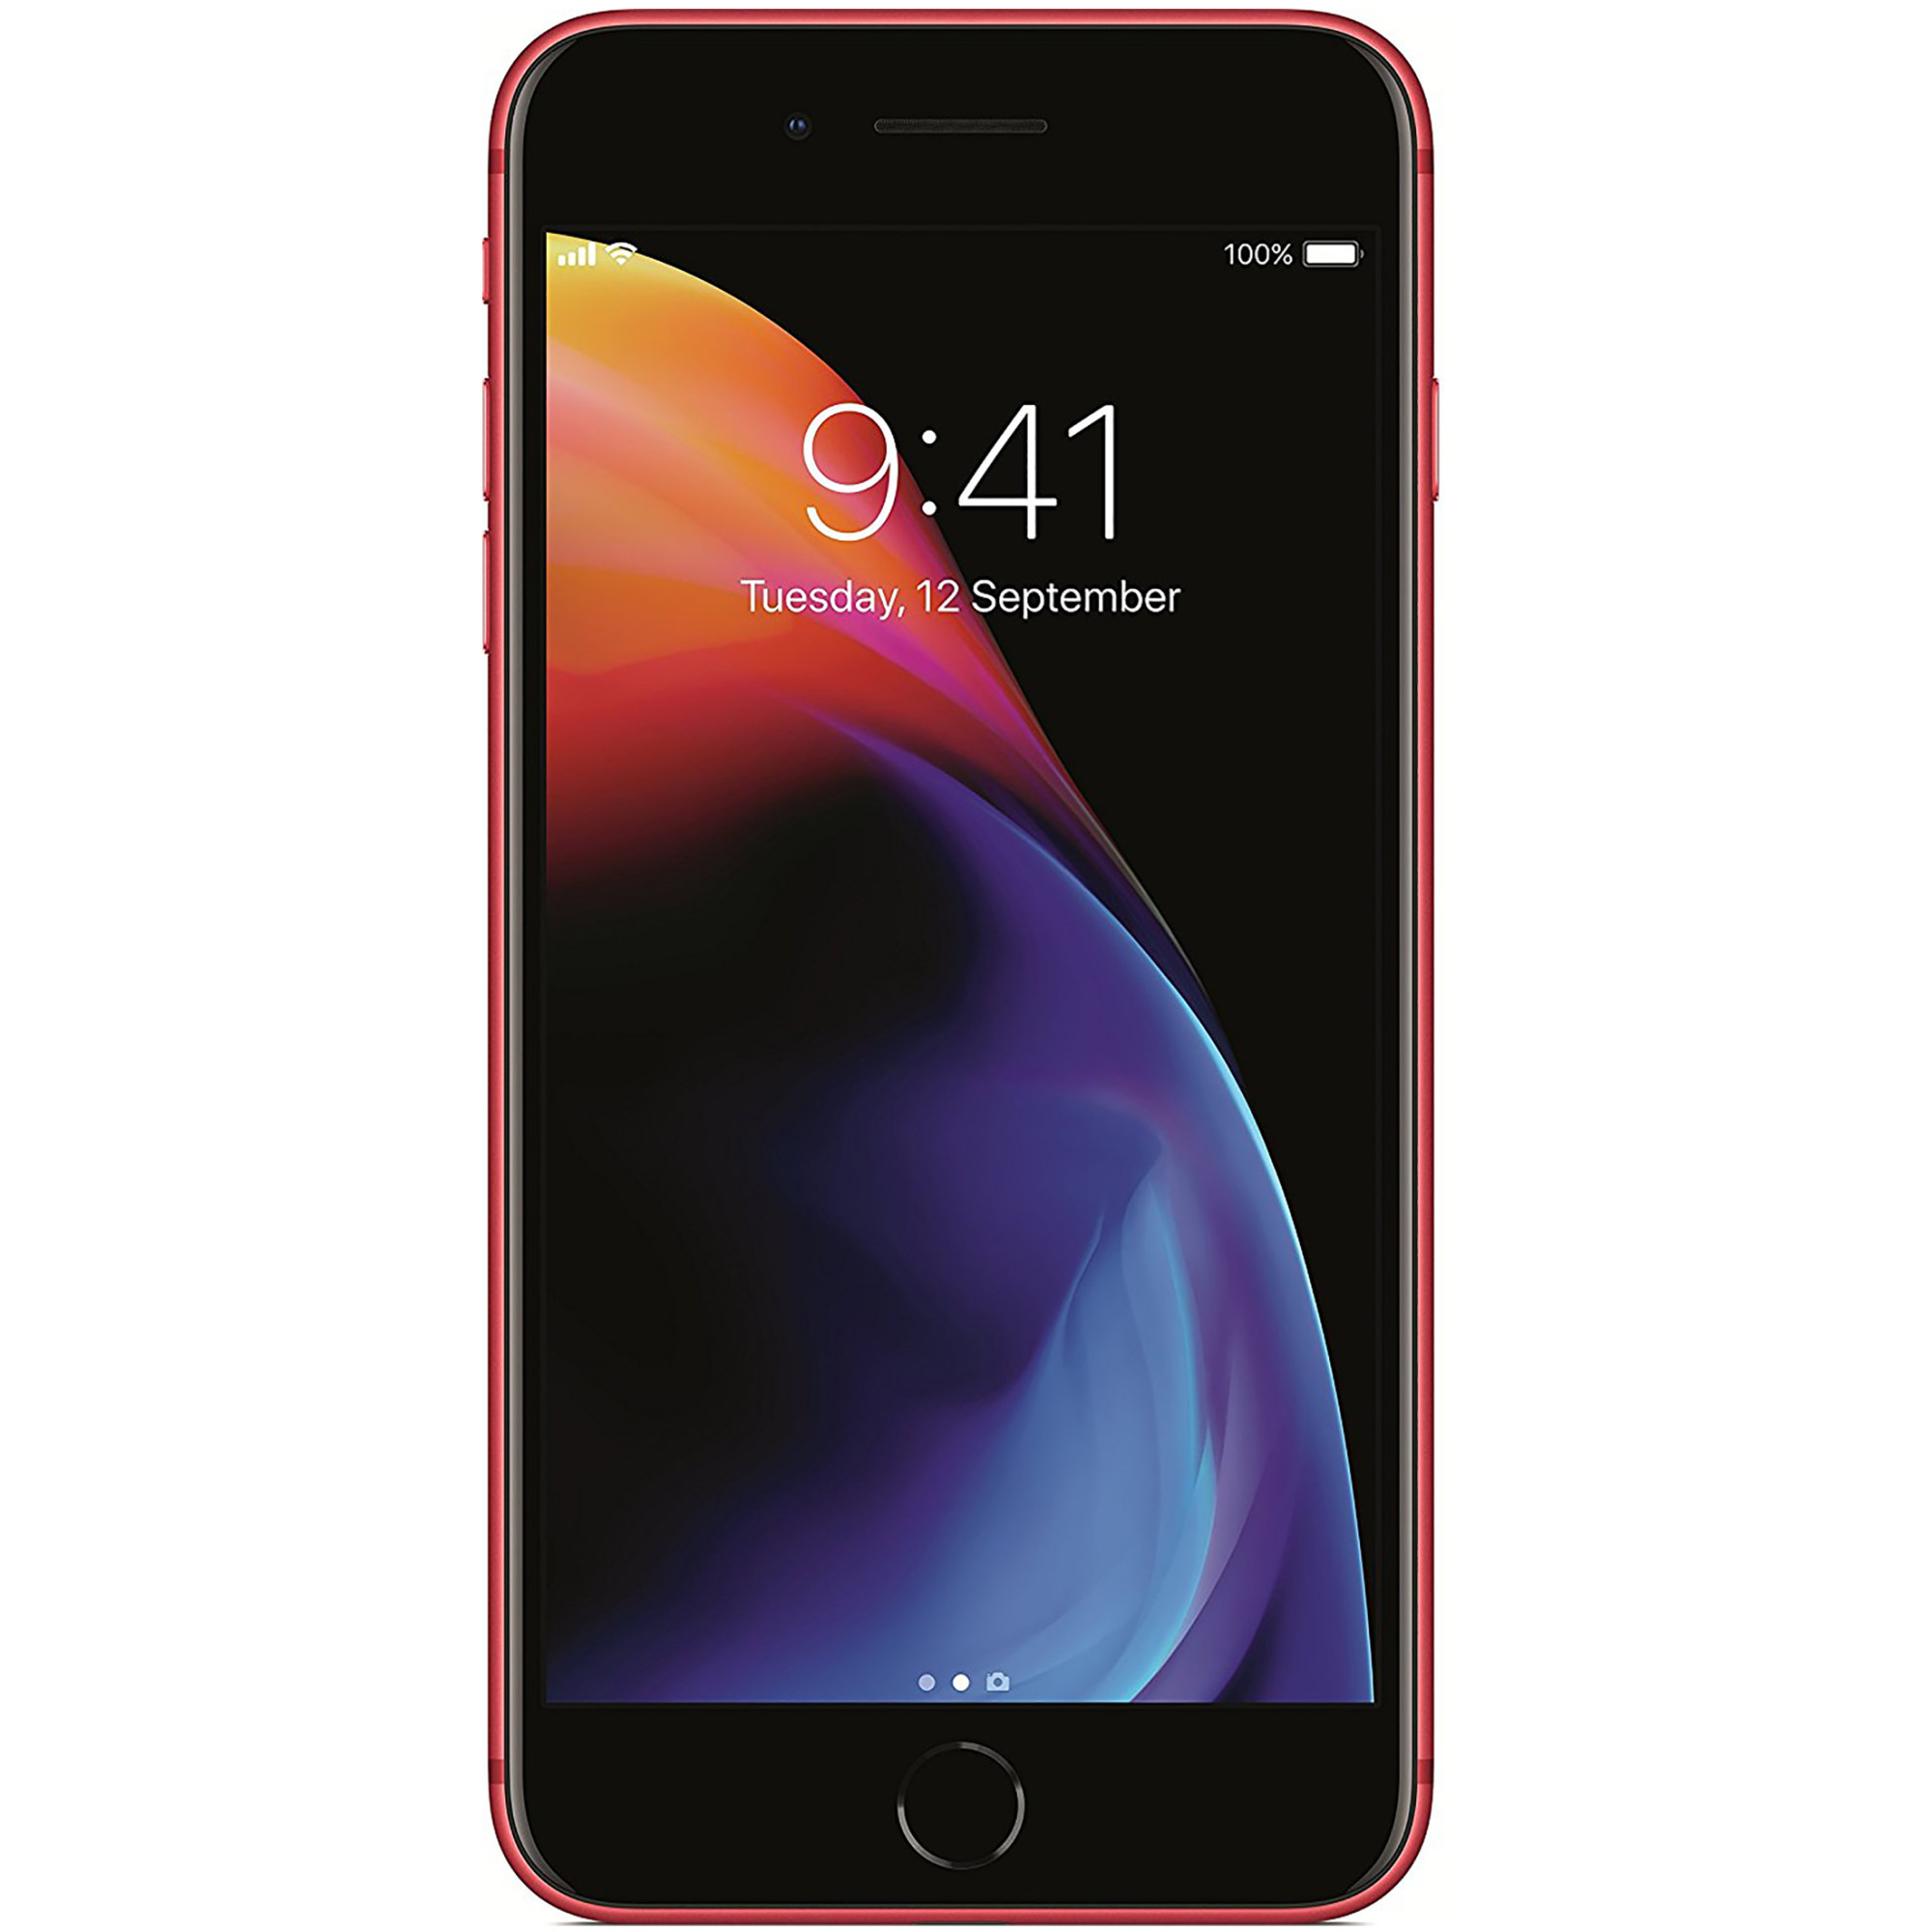 Apple iPhone 8 Plus 64GB Red GSM Unlocked (AT&T + T-Mobile) Smartphone - Grade B Used - image 4 of 4